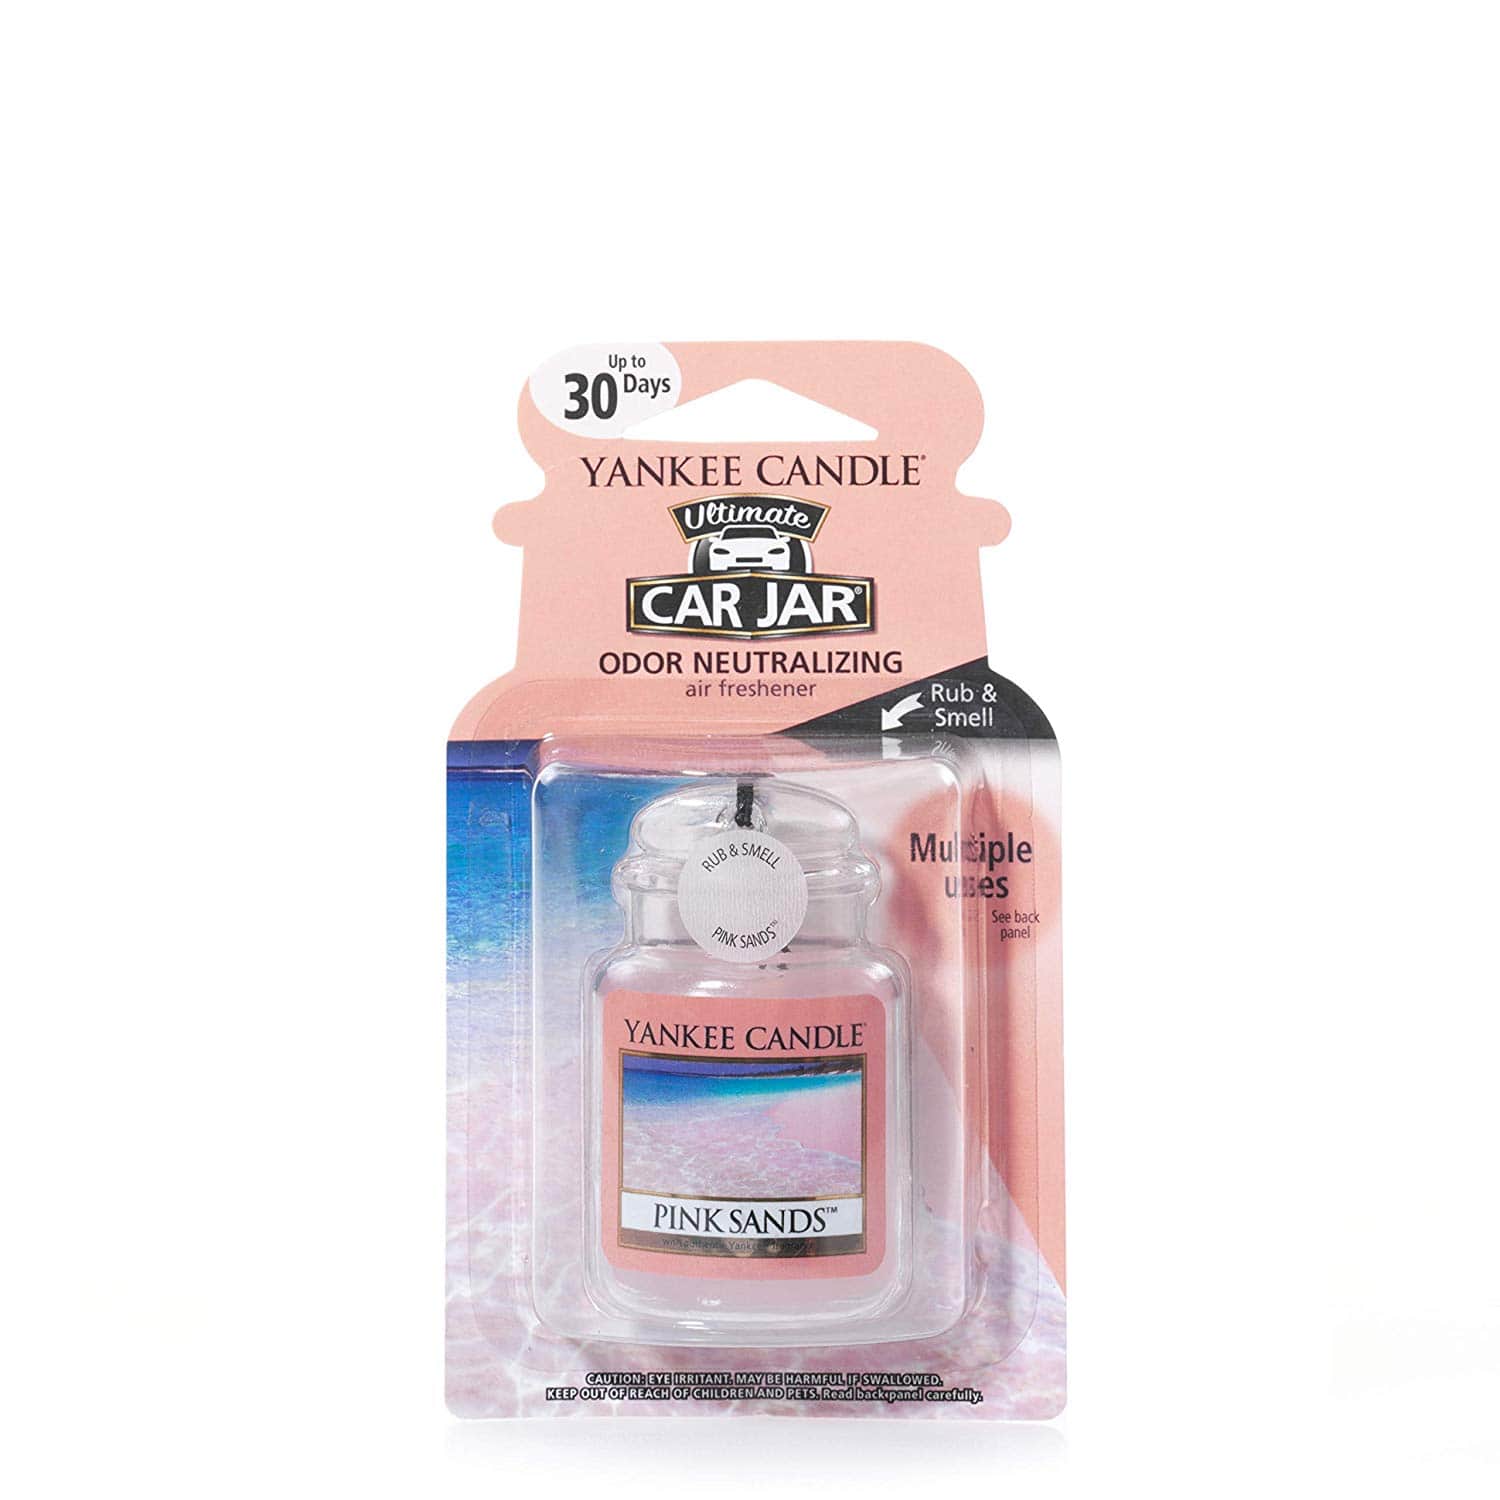 http://www.paggicasalinghi.it/wp-content/uploads/2019/07/yankee_candle_car_jar_pink_sands-min.jpg